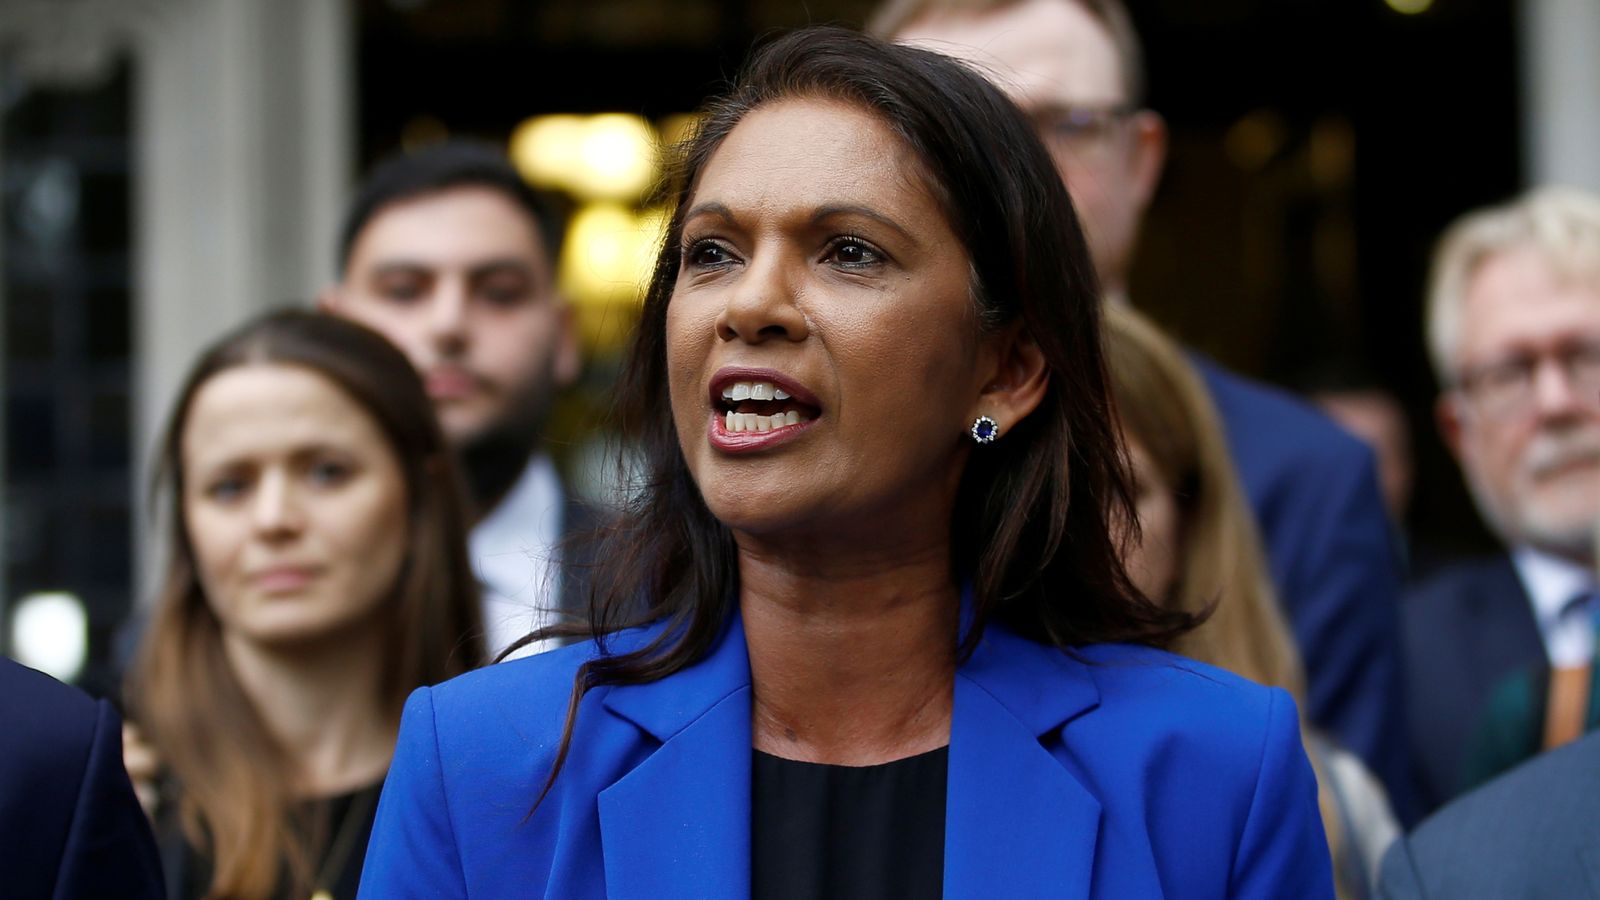 'Democracy gone wrong': Gina Miller criticises Monzo for closing bank account